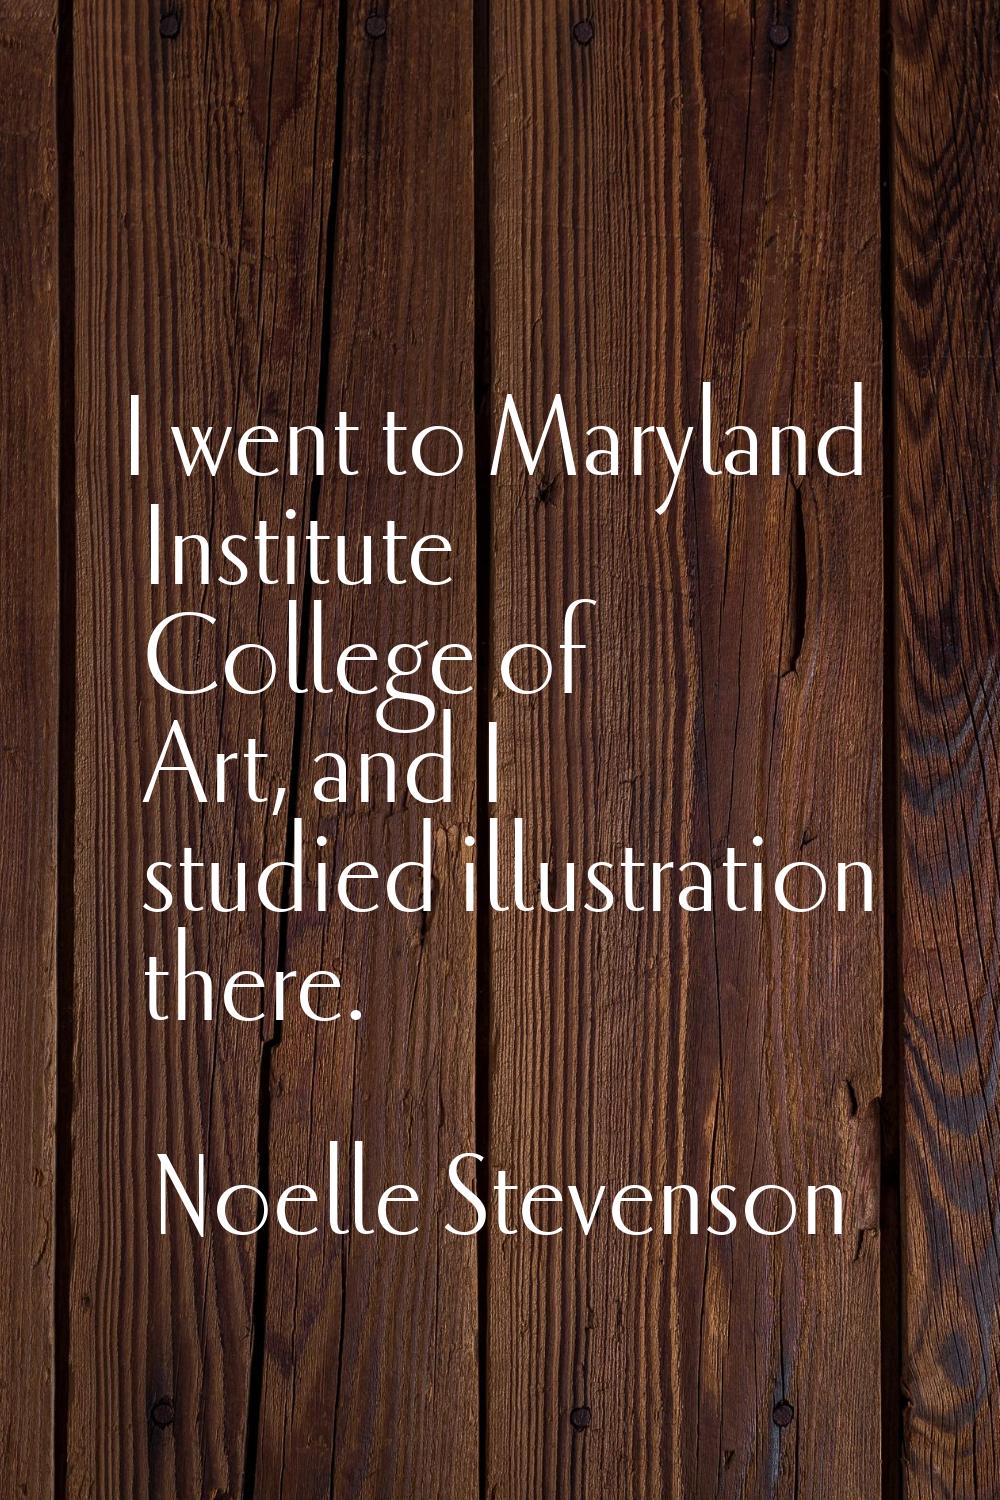 I went to Maryland Institute College of Art, and I studied illustration there.